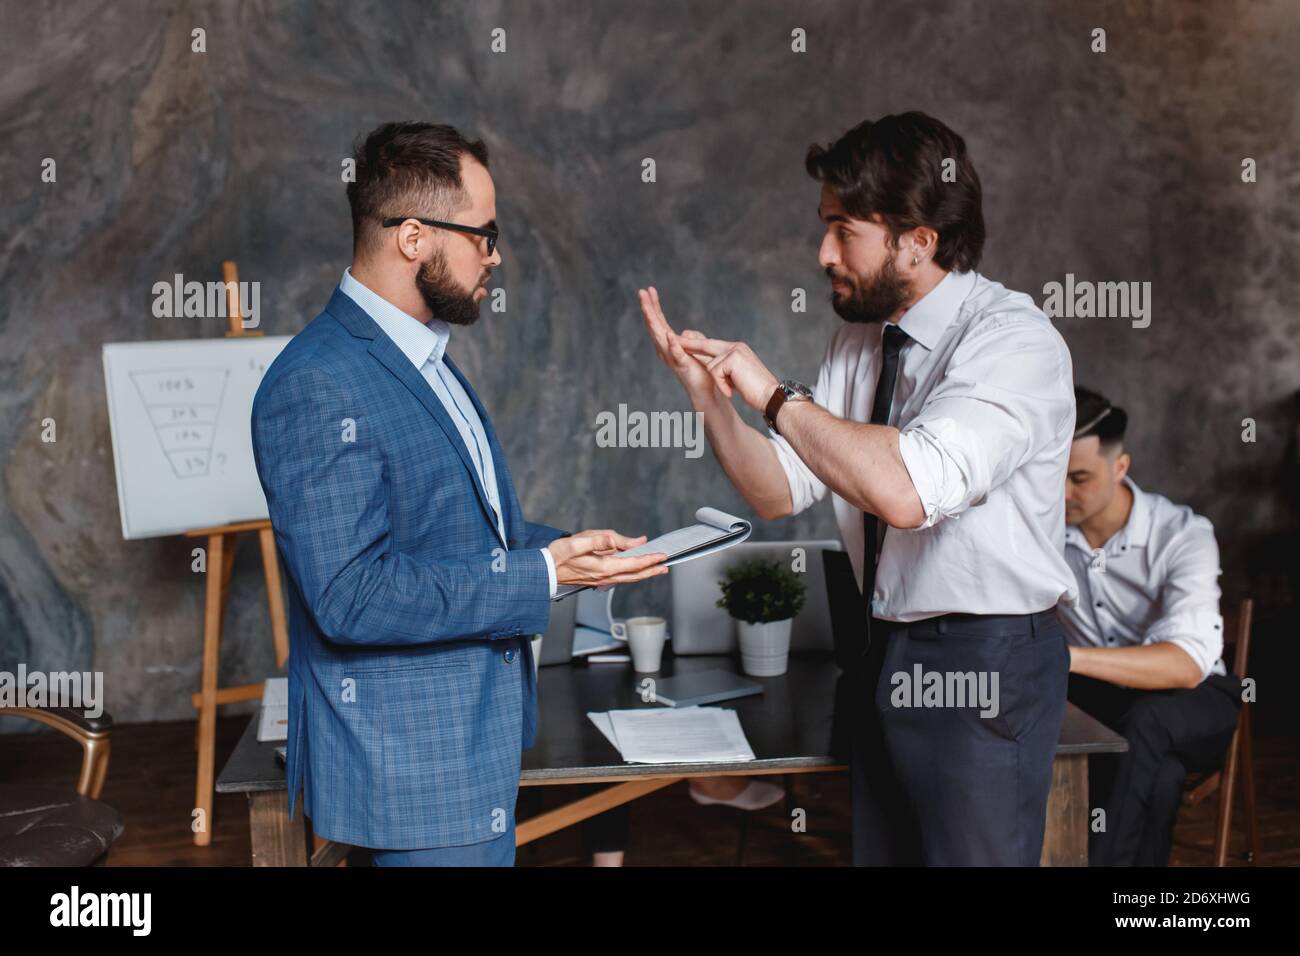 caucasian colleagues disputing having disagreement at work blaming each other in mistake, diverse coworkers arguing about project, having conflict Stock Photo